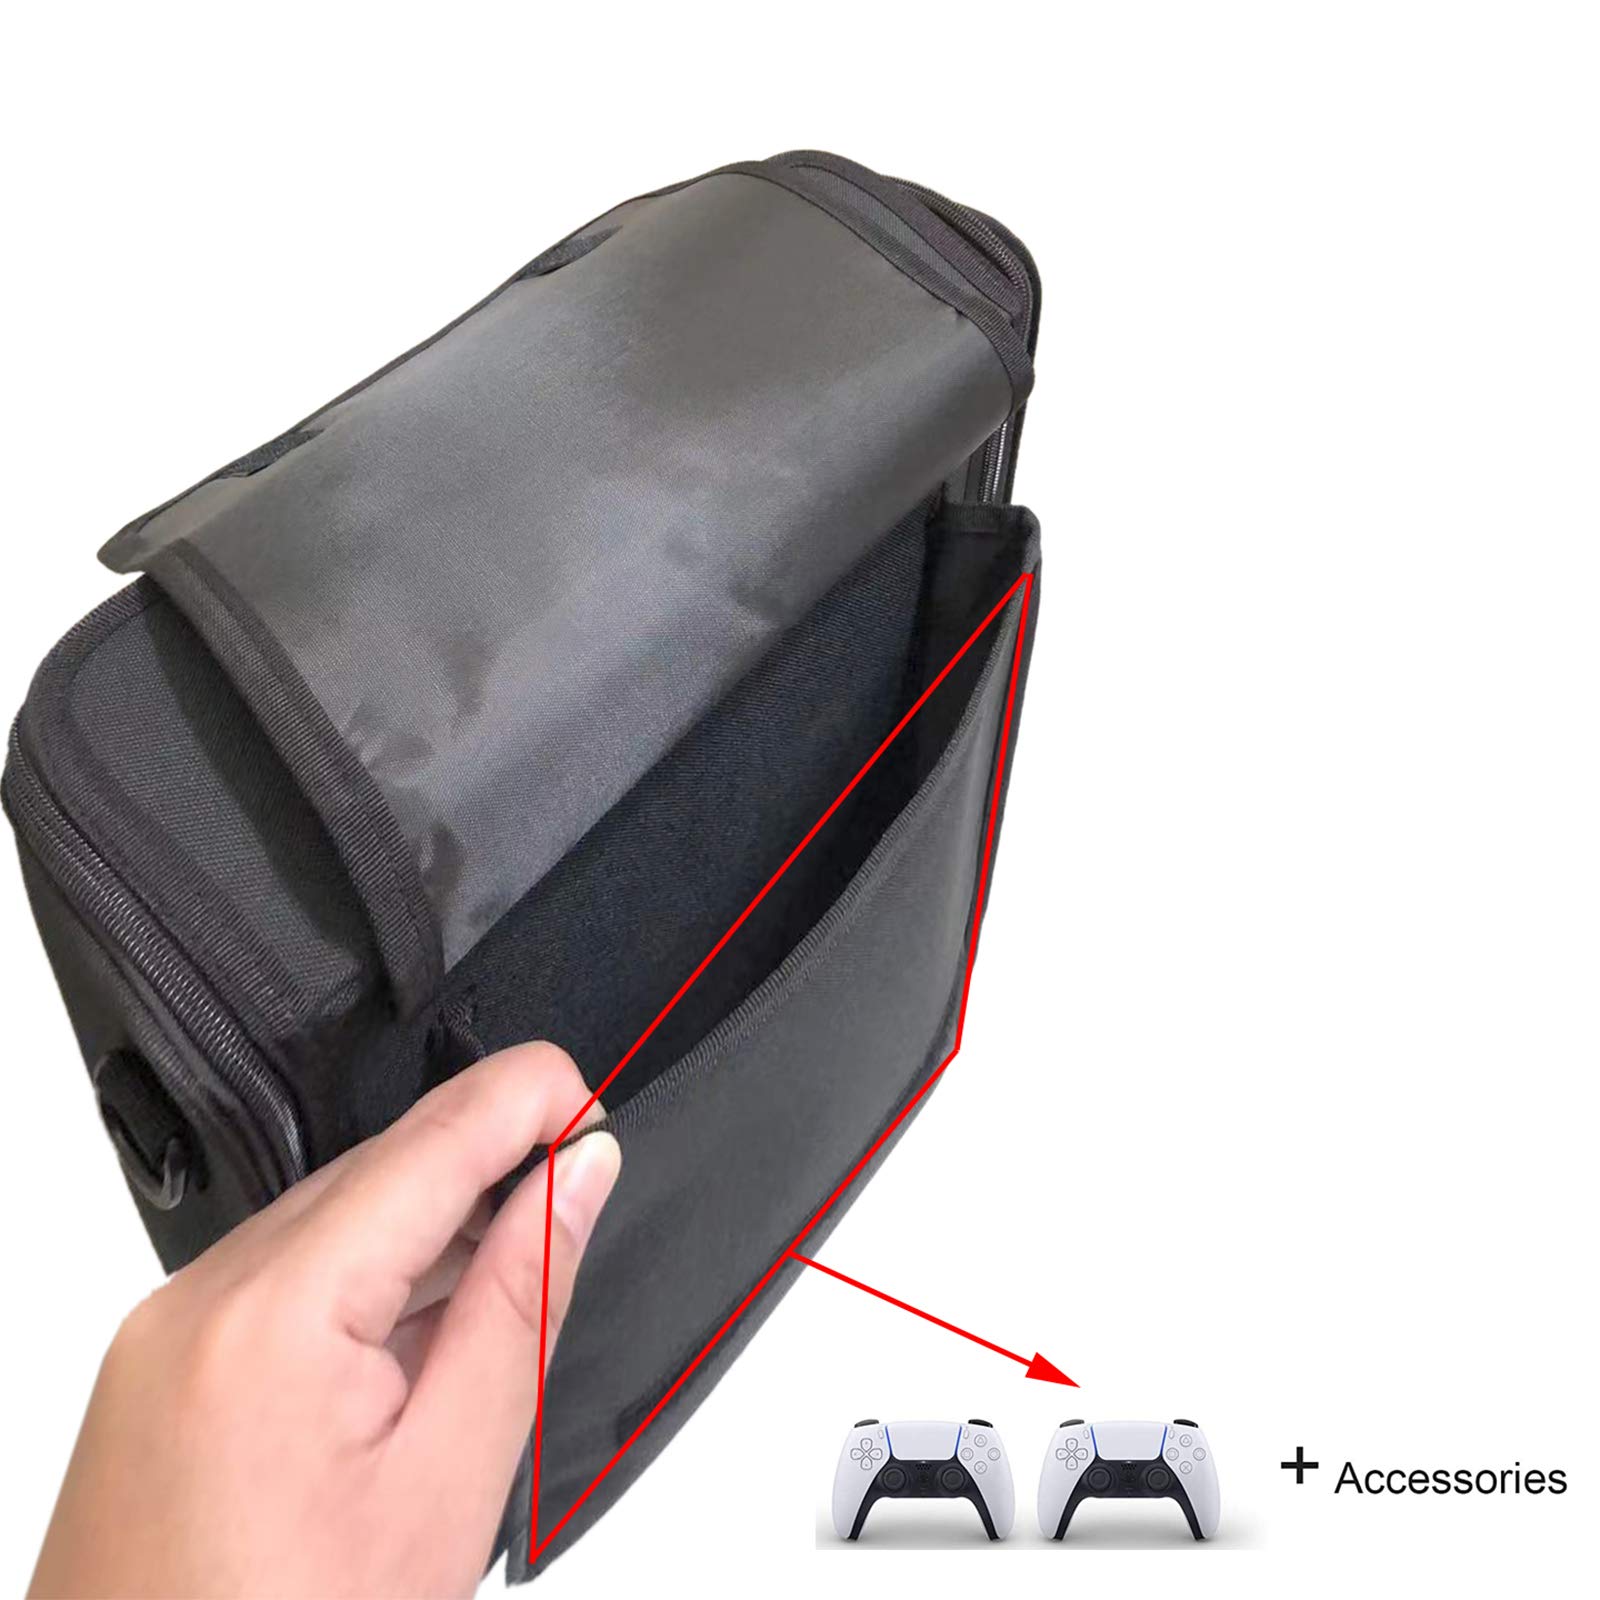 Large Capacity PS5 Storage Bag Carrying Case